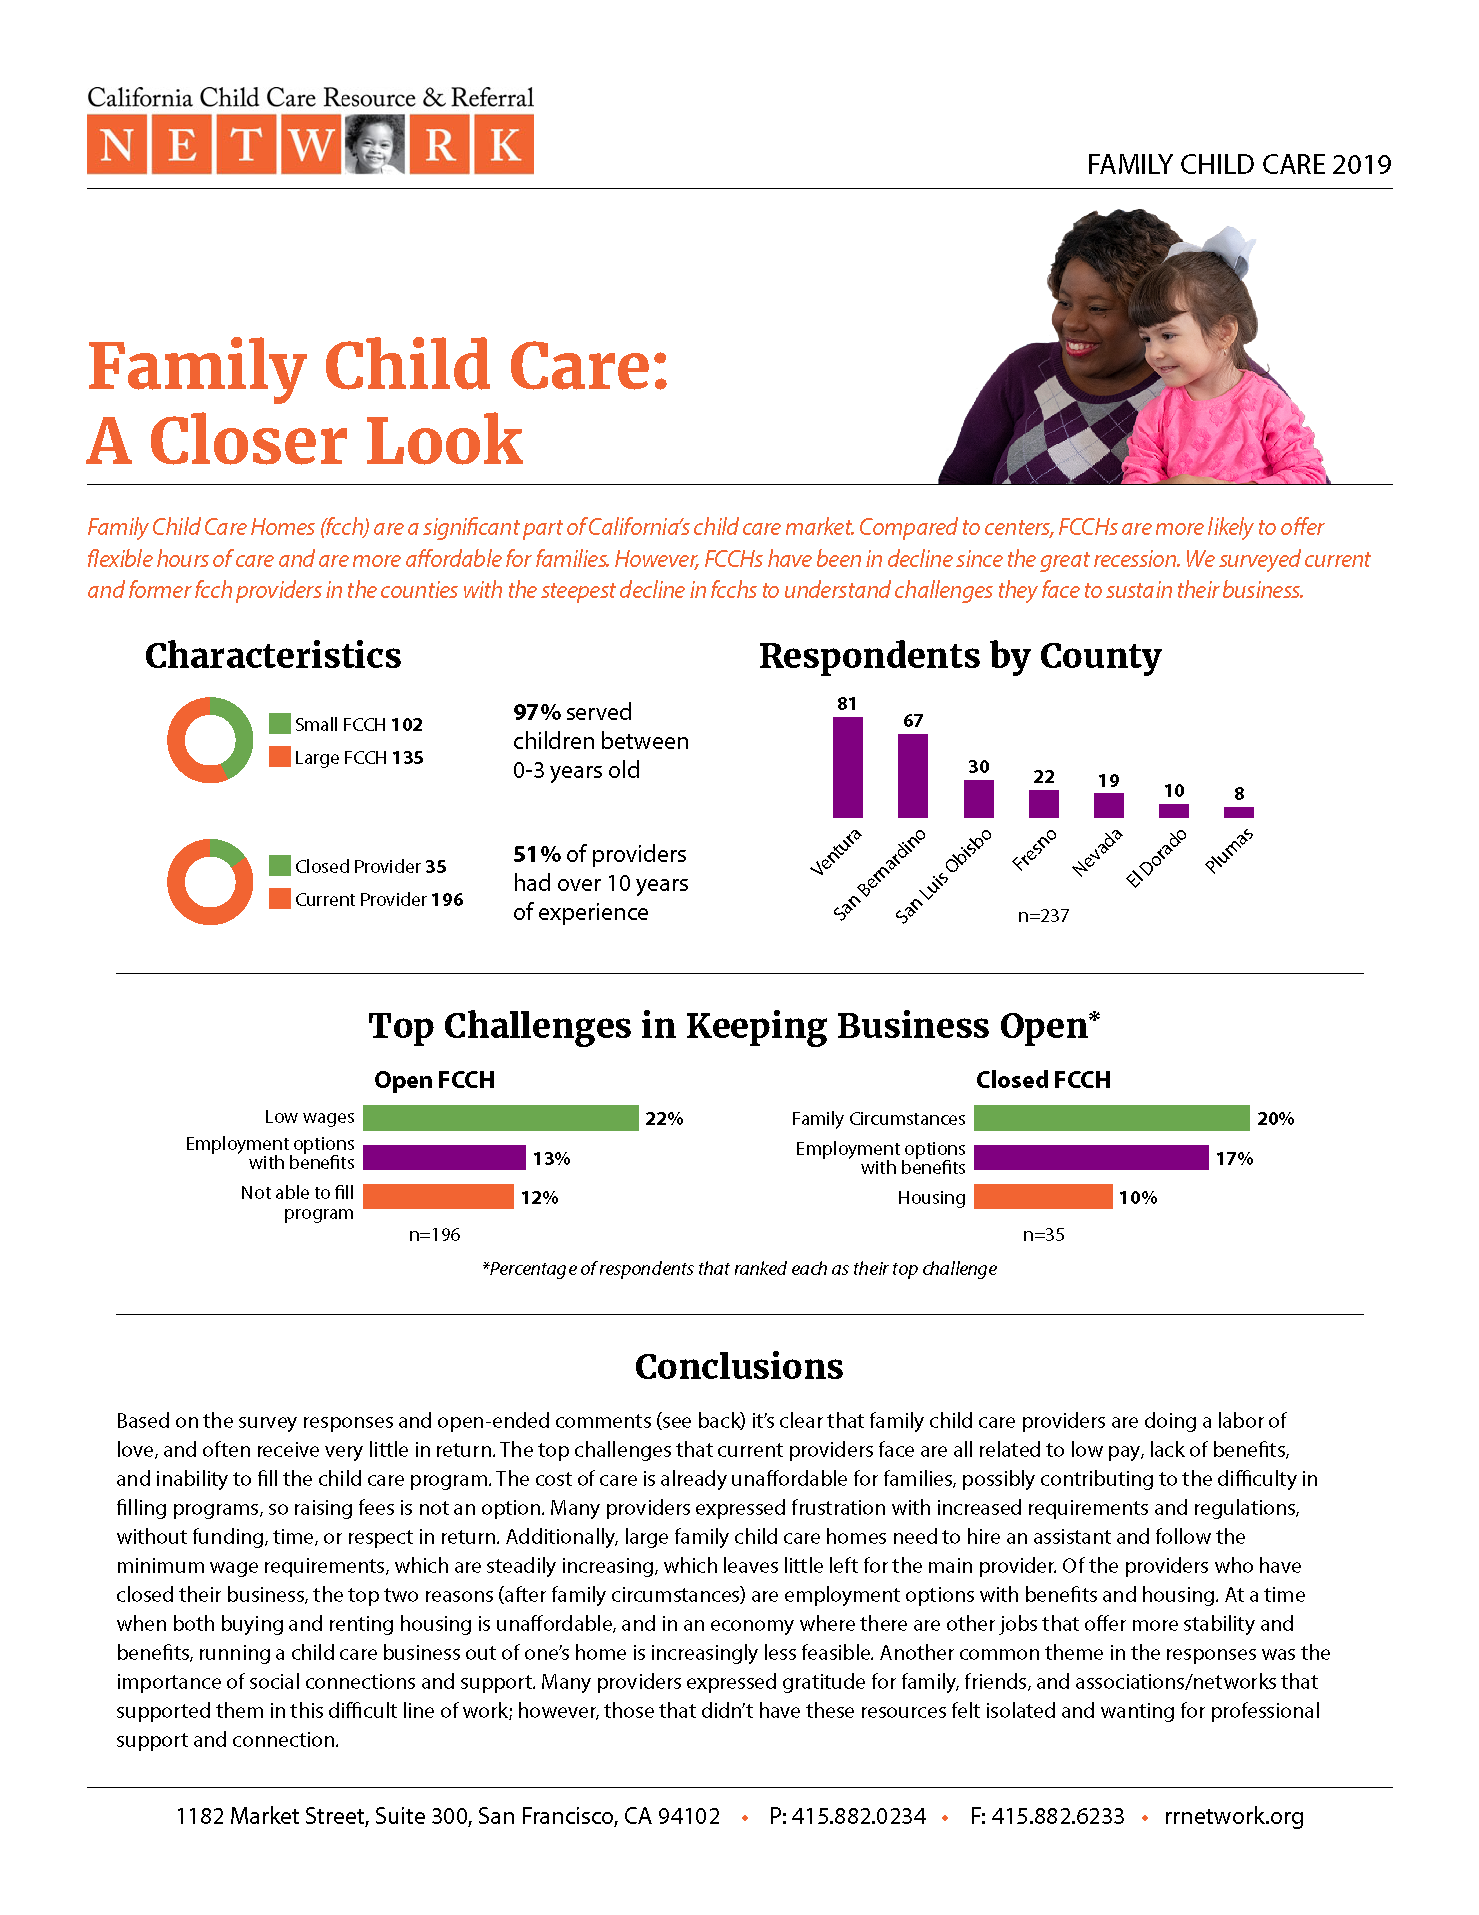 Family Child Care Issues: A closer look 2019